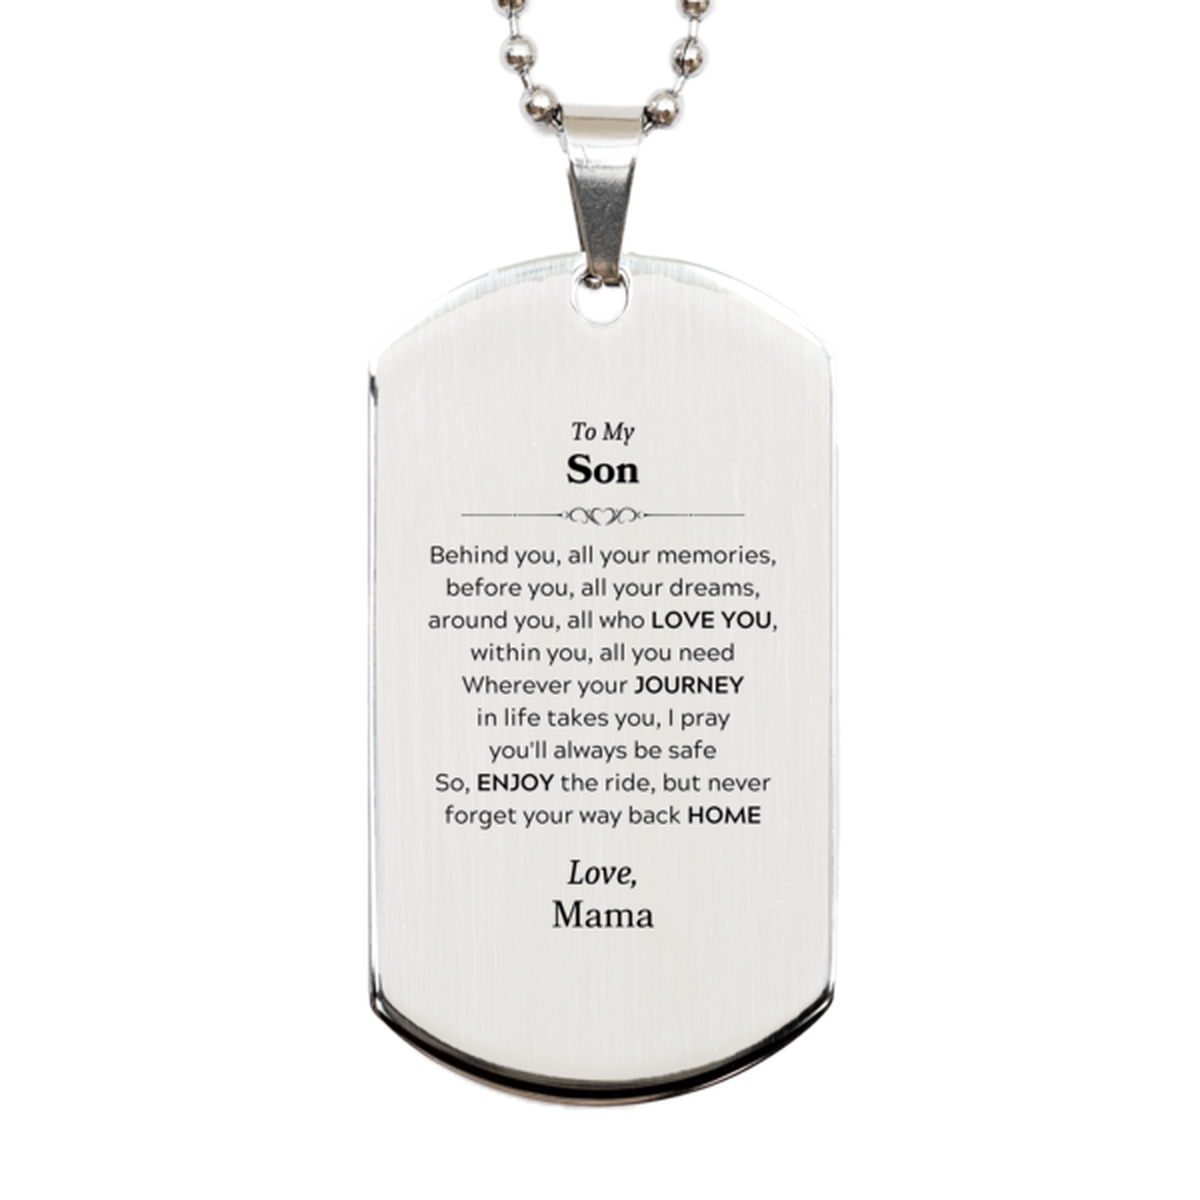 To My Son Graduation Gifts from Mama, Son Silver Dog Tag Christmas Birthday Gifts for Son Behind you, all your memories, before you, all your dreams. Love, Mama